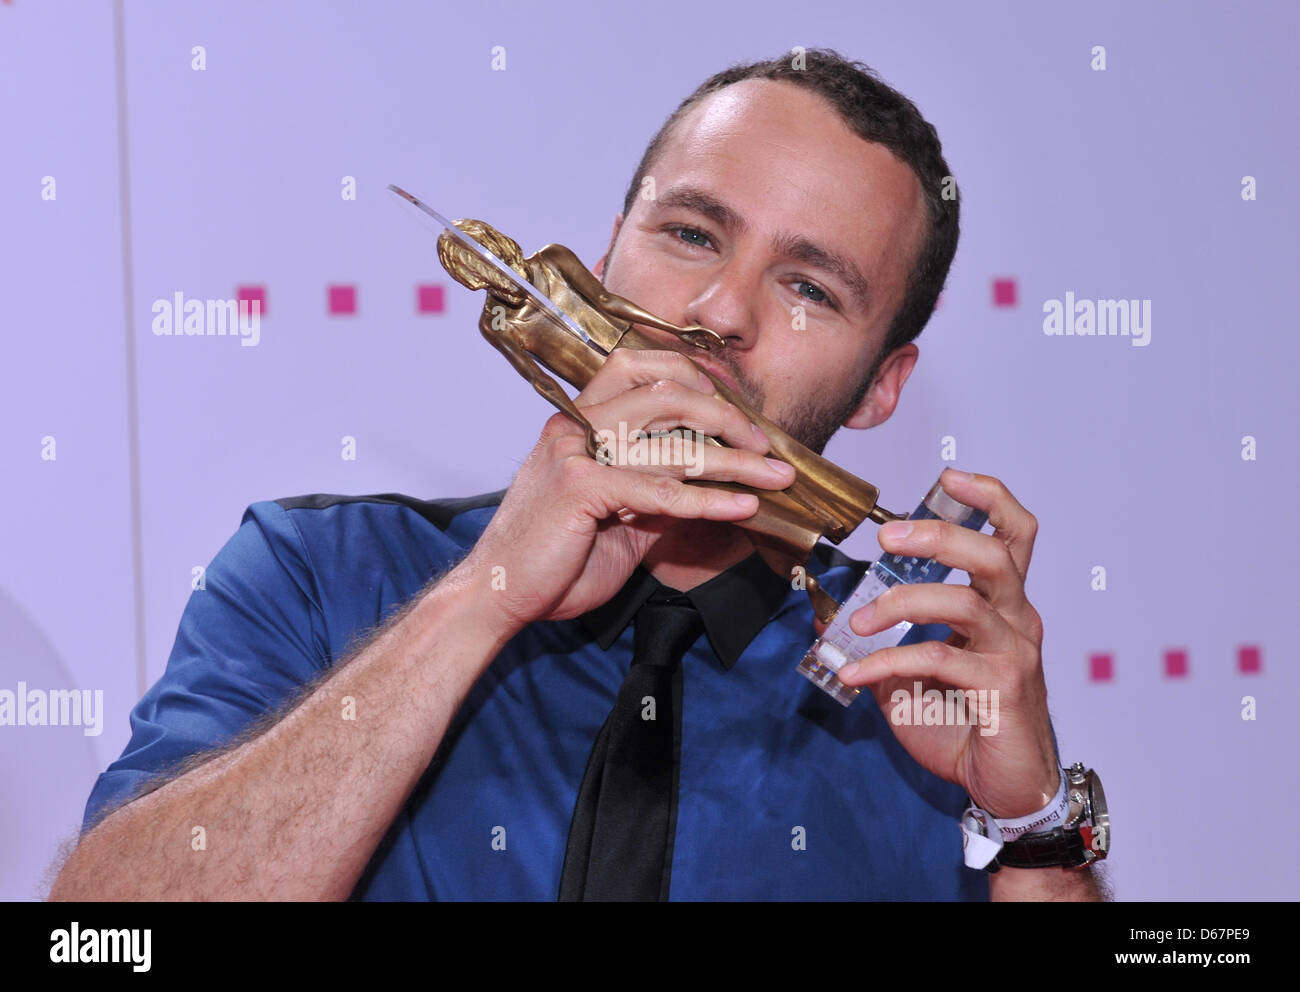 British singer Marlon Roudette kisses his award in the 'Talent of the Year' category at the DIVA 2012 entertainment award show in Munich, Germany, 26 June 2012. German entertainment prize 'Diva' was awarded for the 22nd time. The prize is awarded to people with extraordinary achievements in life and sustained success with audience and critics by Constantin Entertainment. Photo: Urs Stock Photo